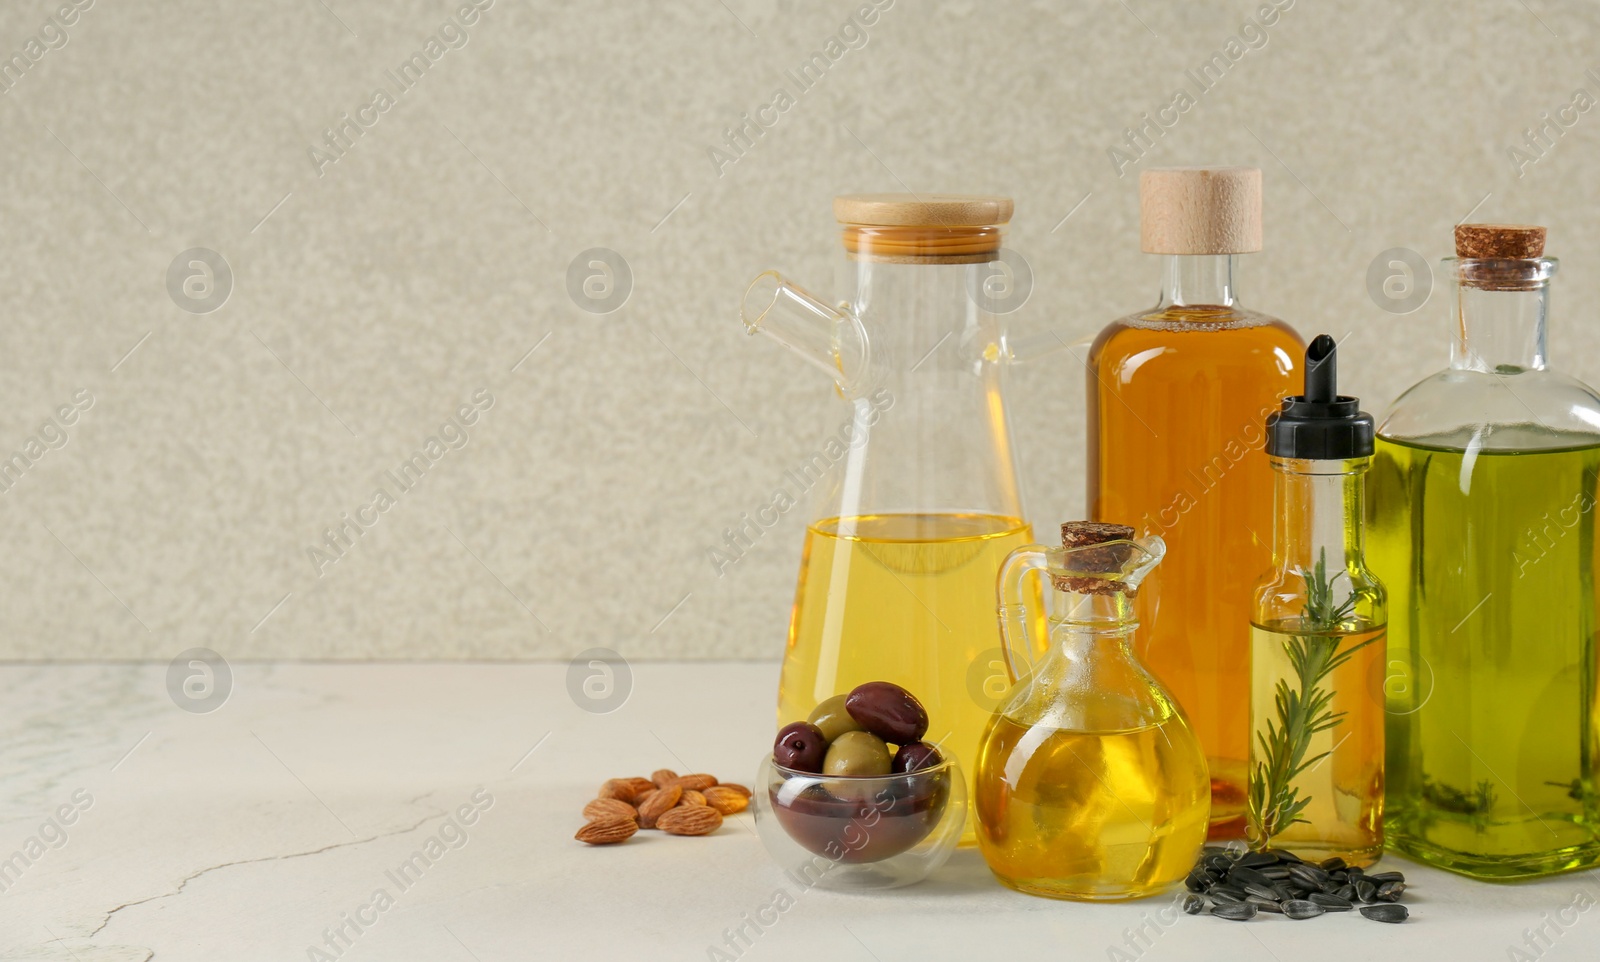 Photo of Vegetable fats. Different cooking oils in glass bottles and ingredients on white table, space for text